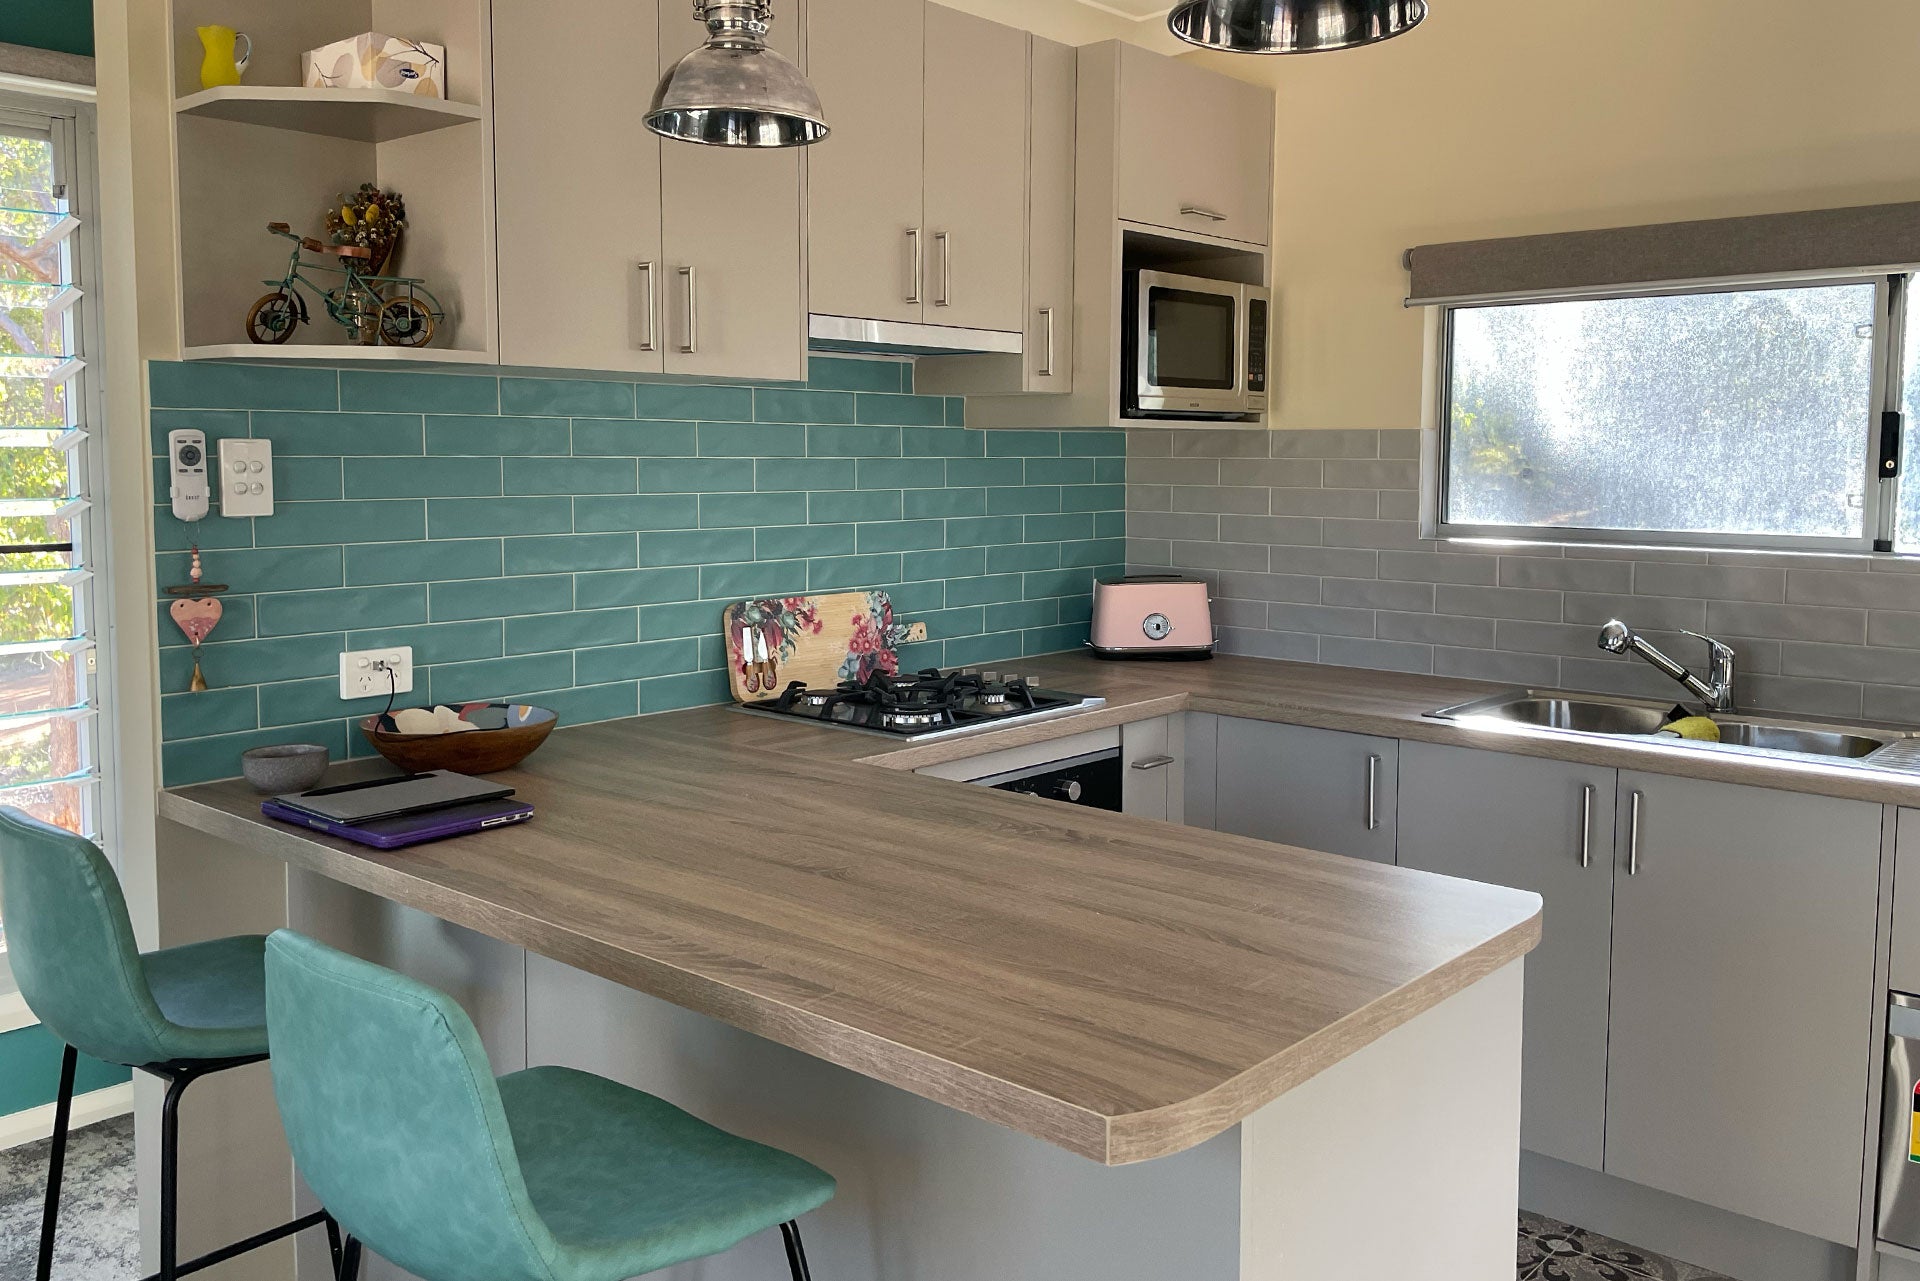 Waroona Project: Creating a Stylish Yet Budget-Friendly Holiday Home